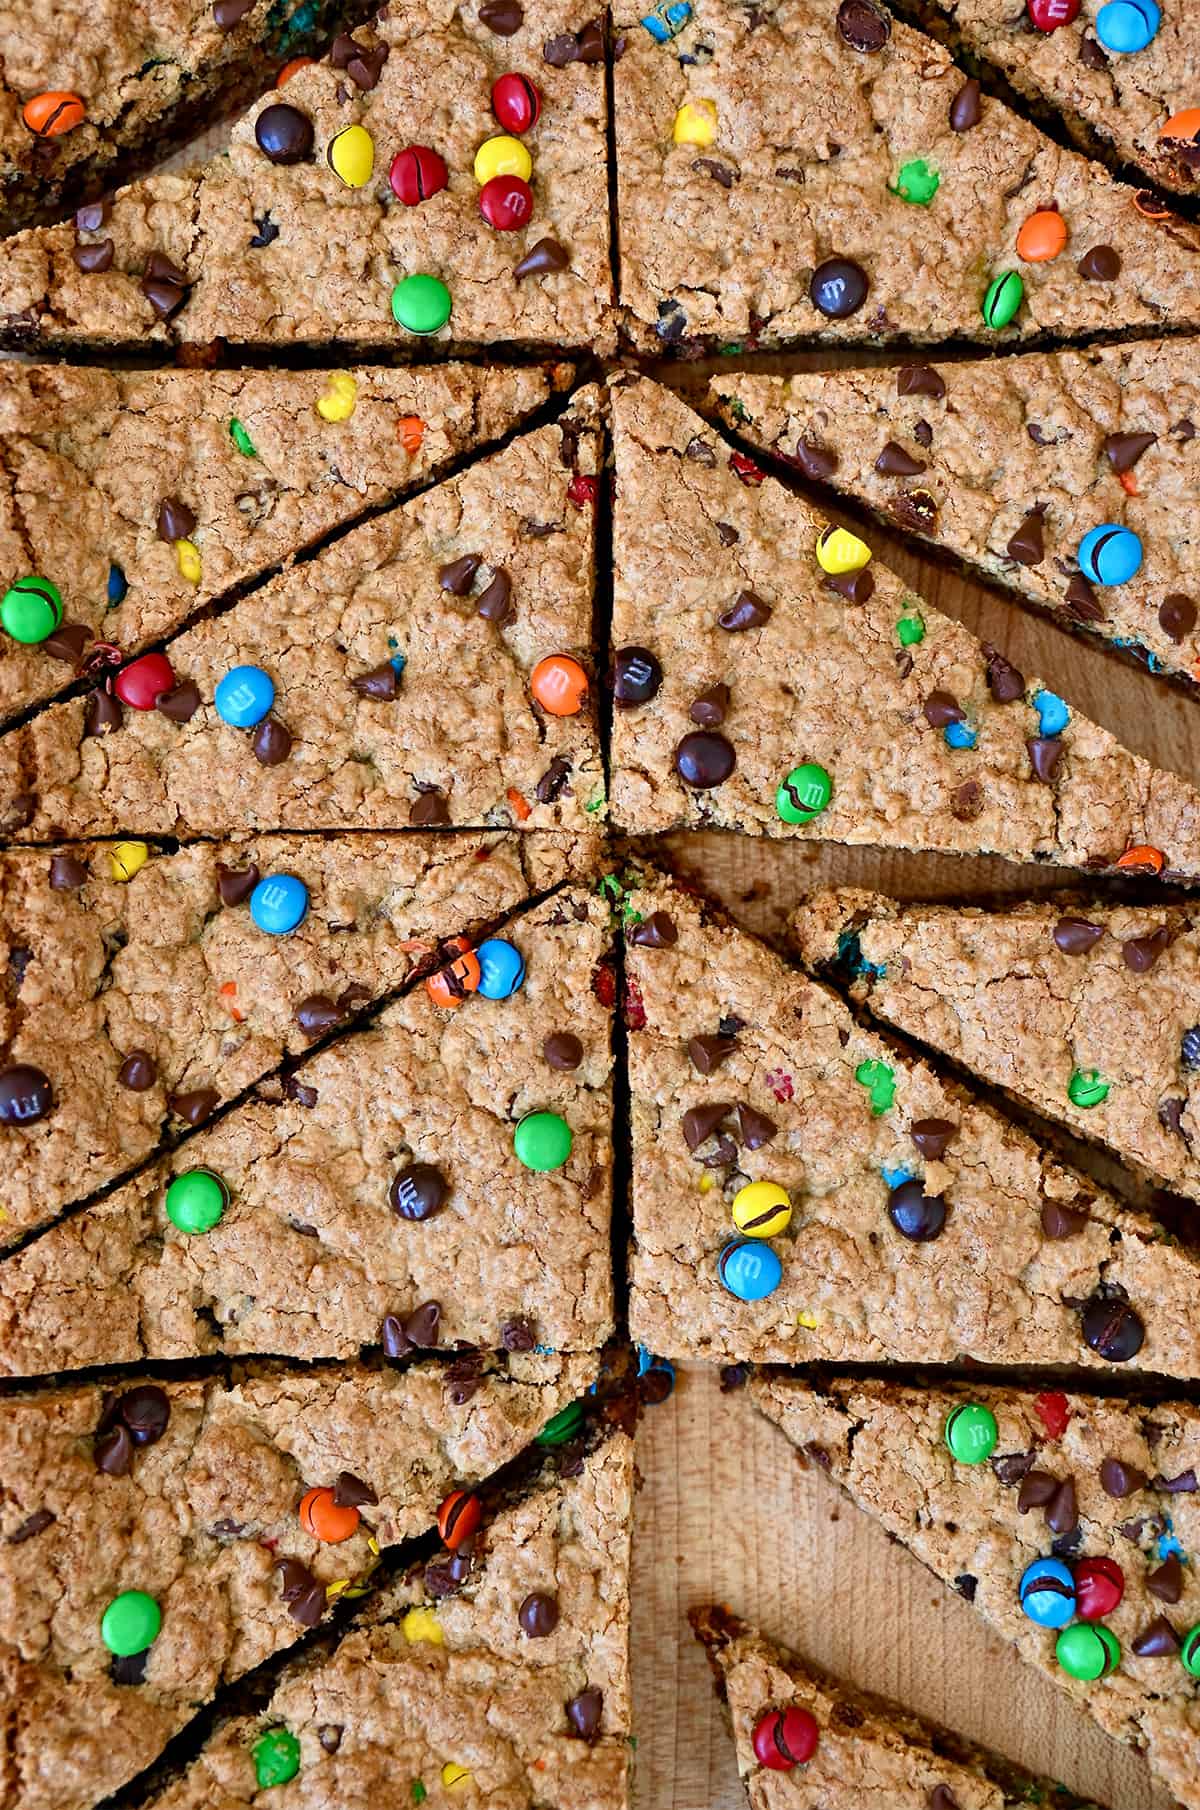 Peanut butter oatmeal bars with M&Ms and chocolate chips.